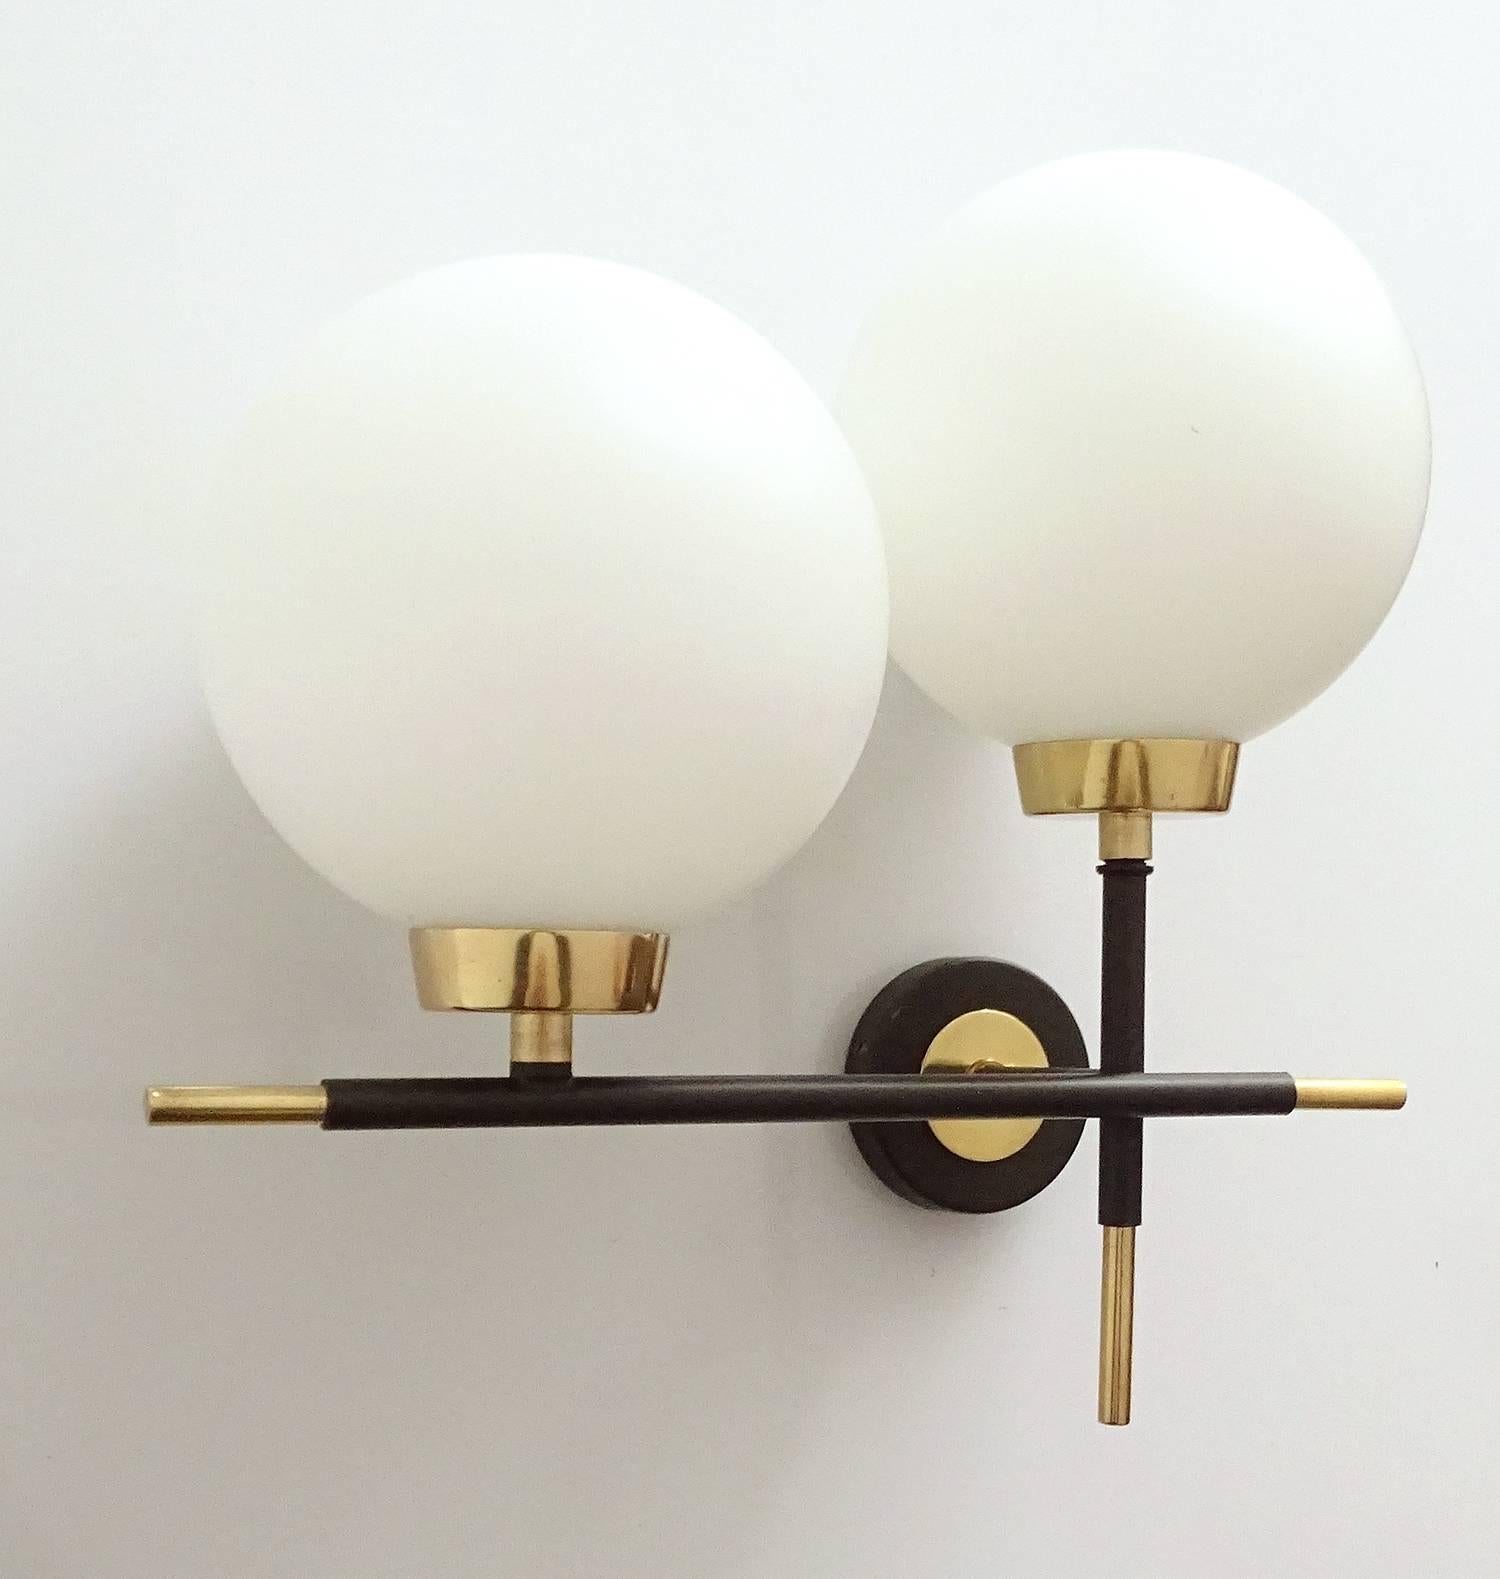  Pair French Mid Century  Sconces, Lunel France, 1960s, Stilnovo Style For Sale 5